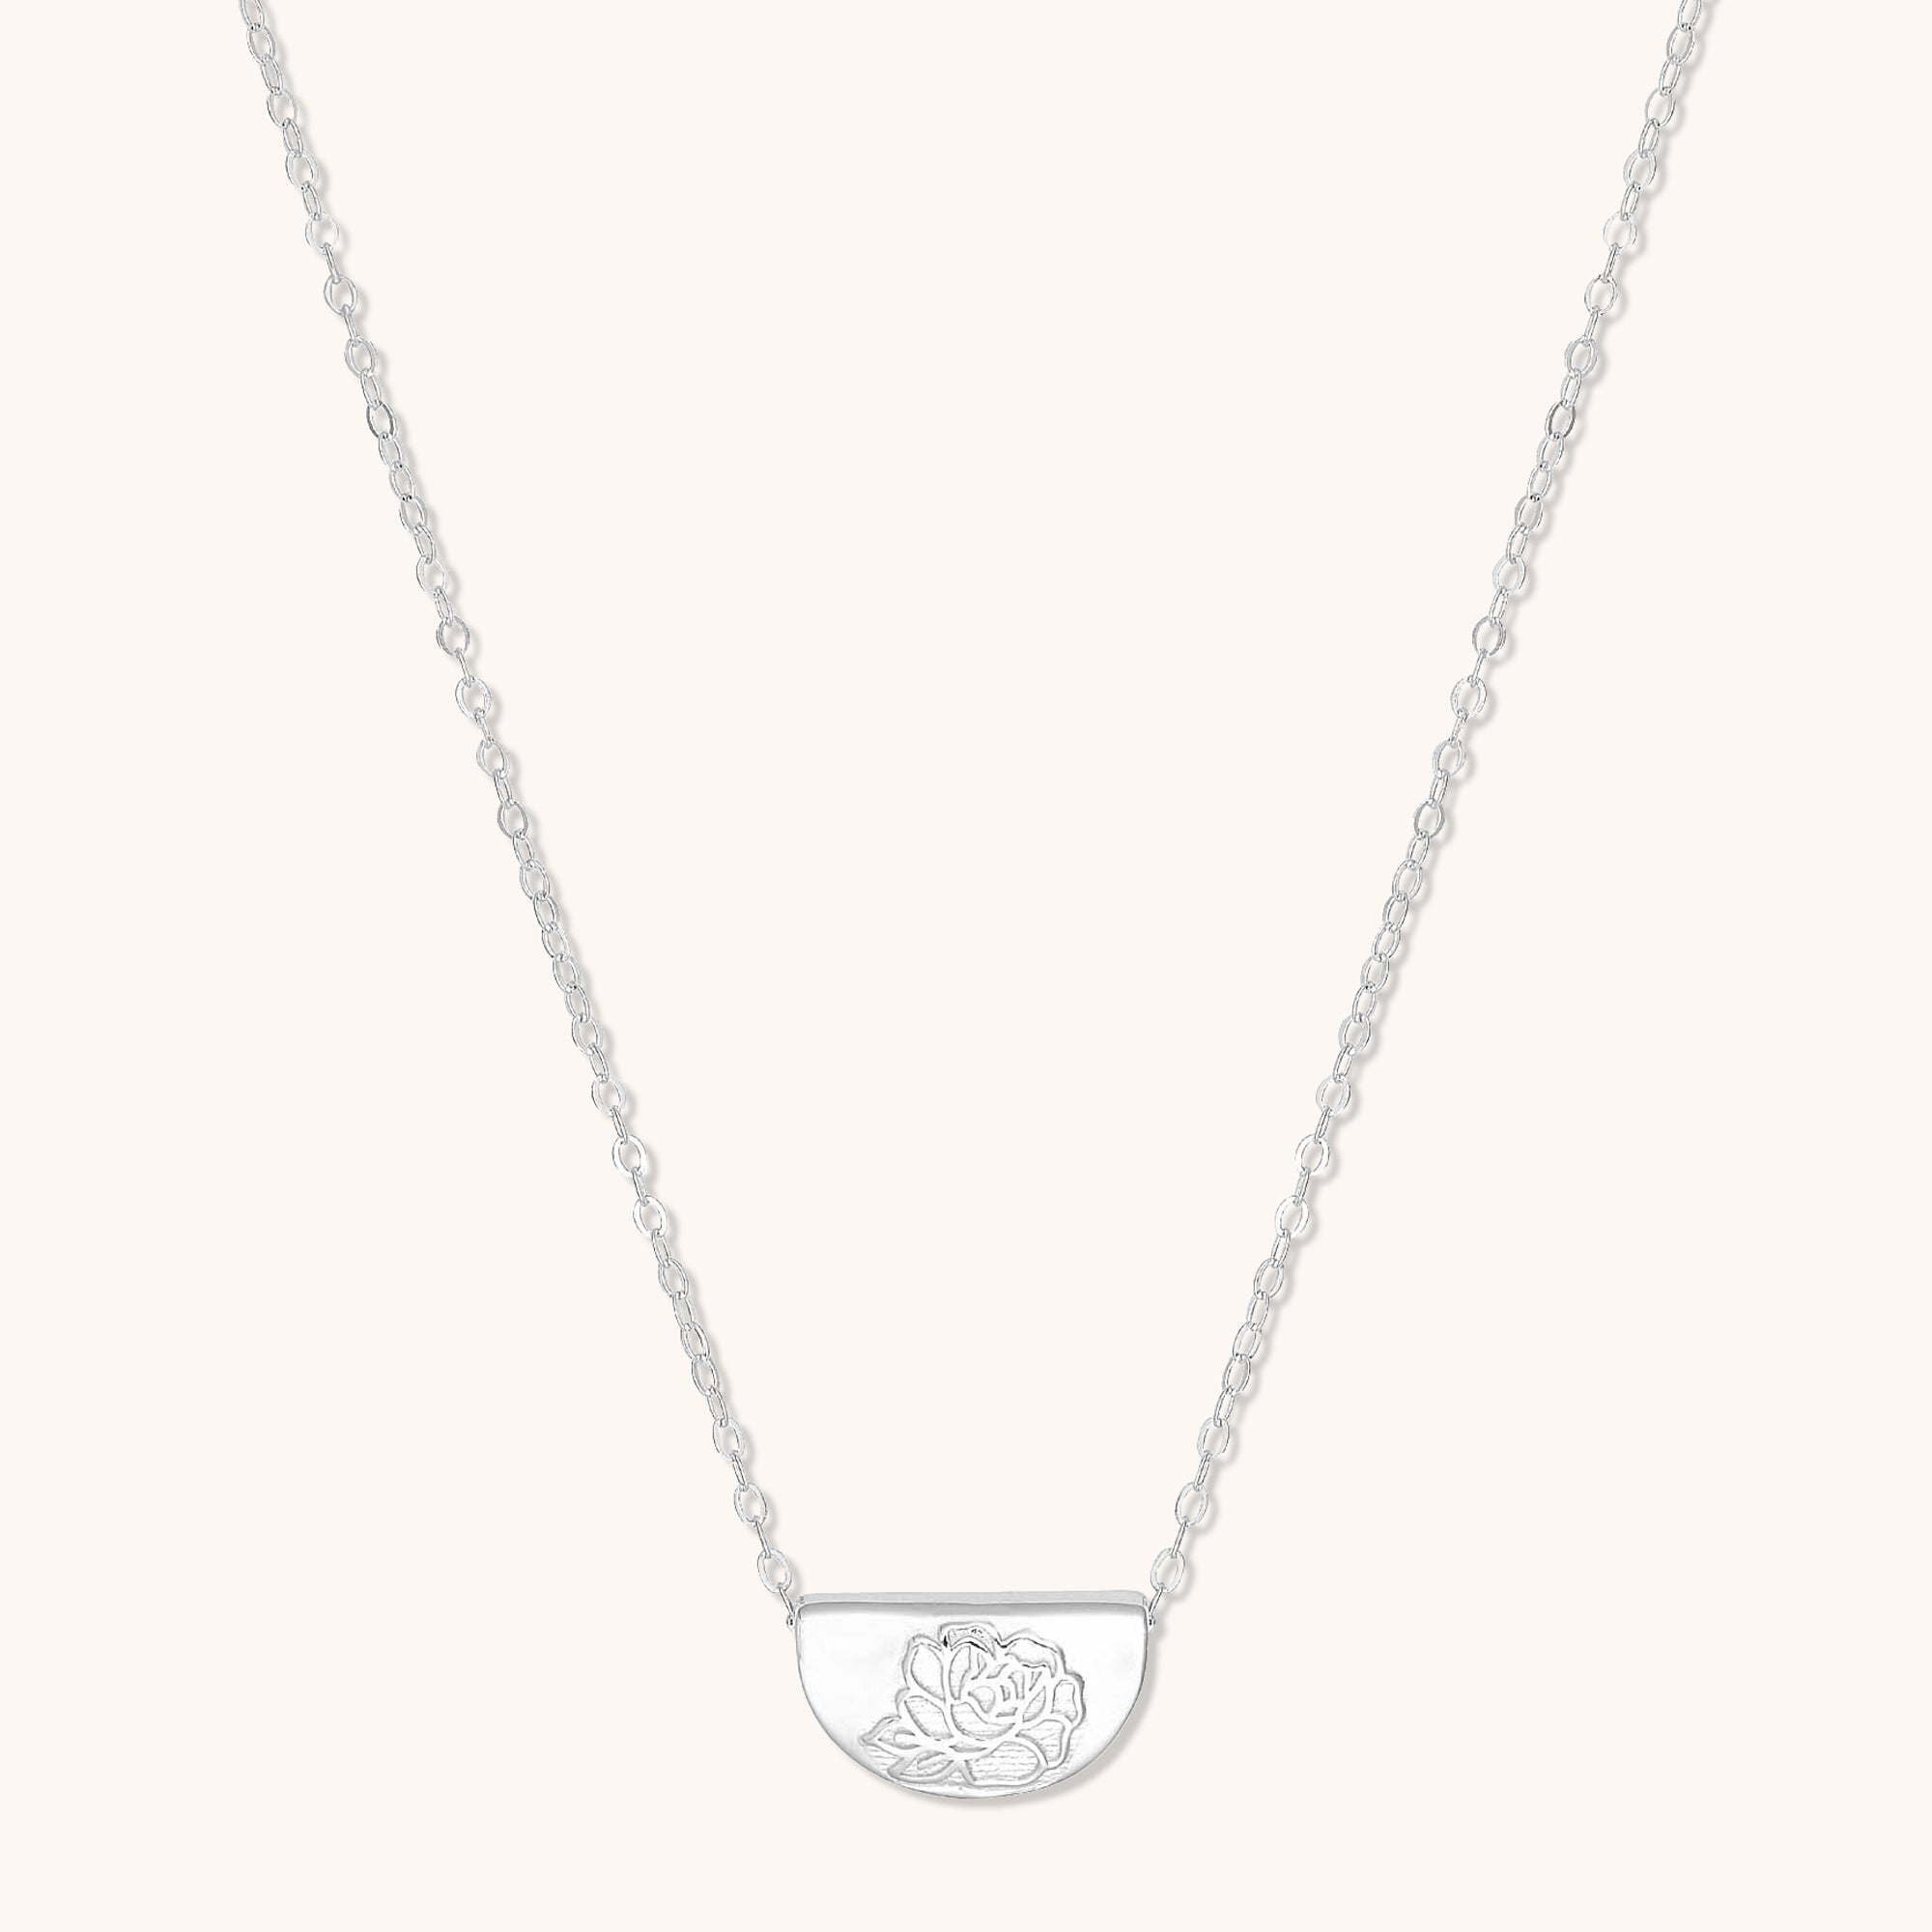 Birth Flower Necklace September (Peony) Silver